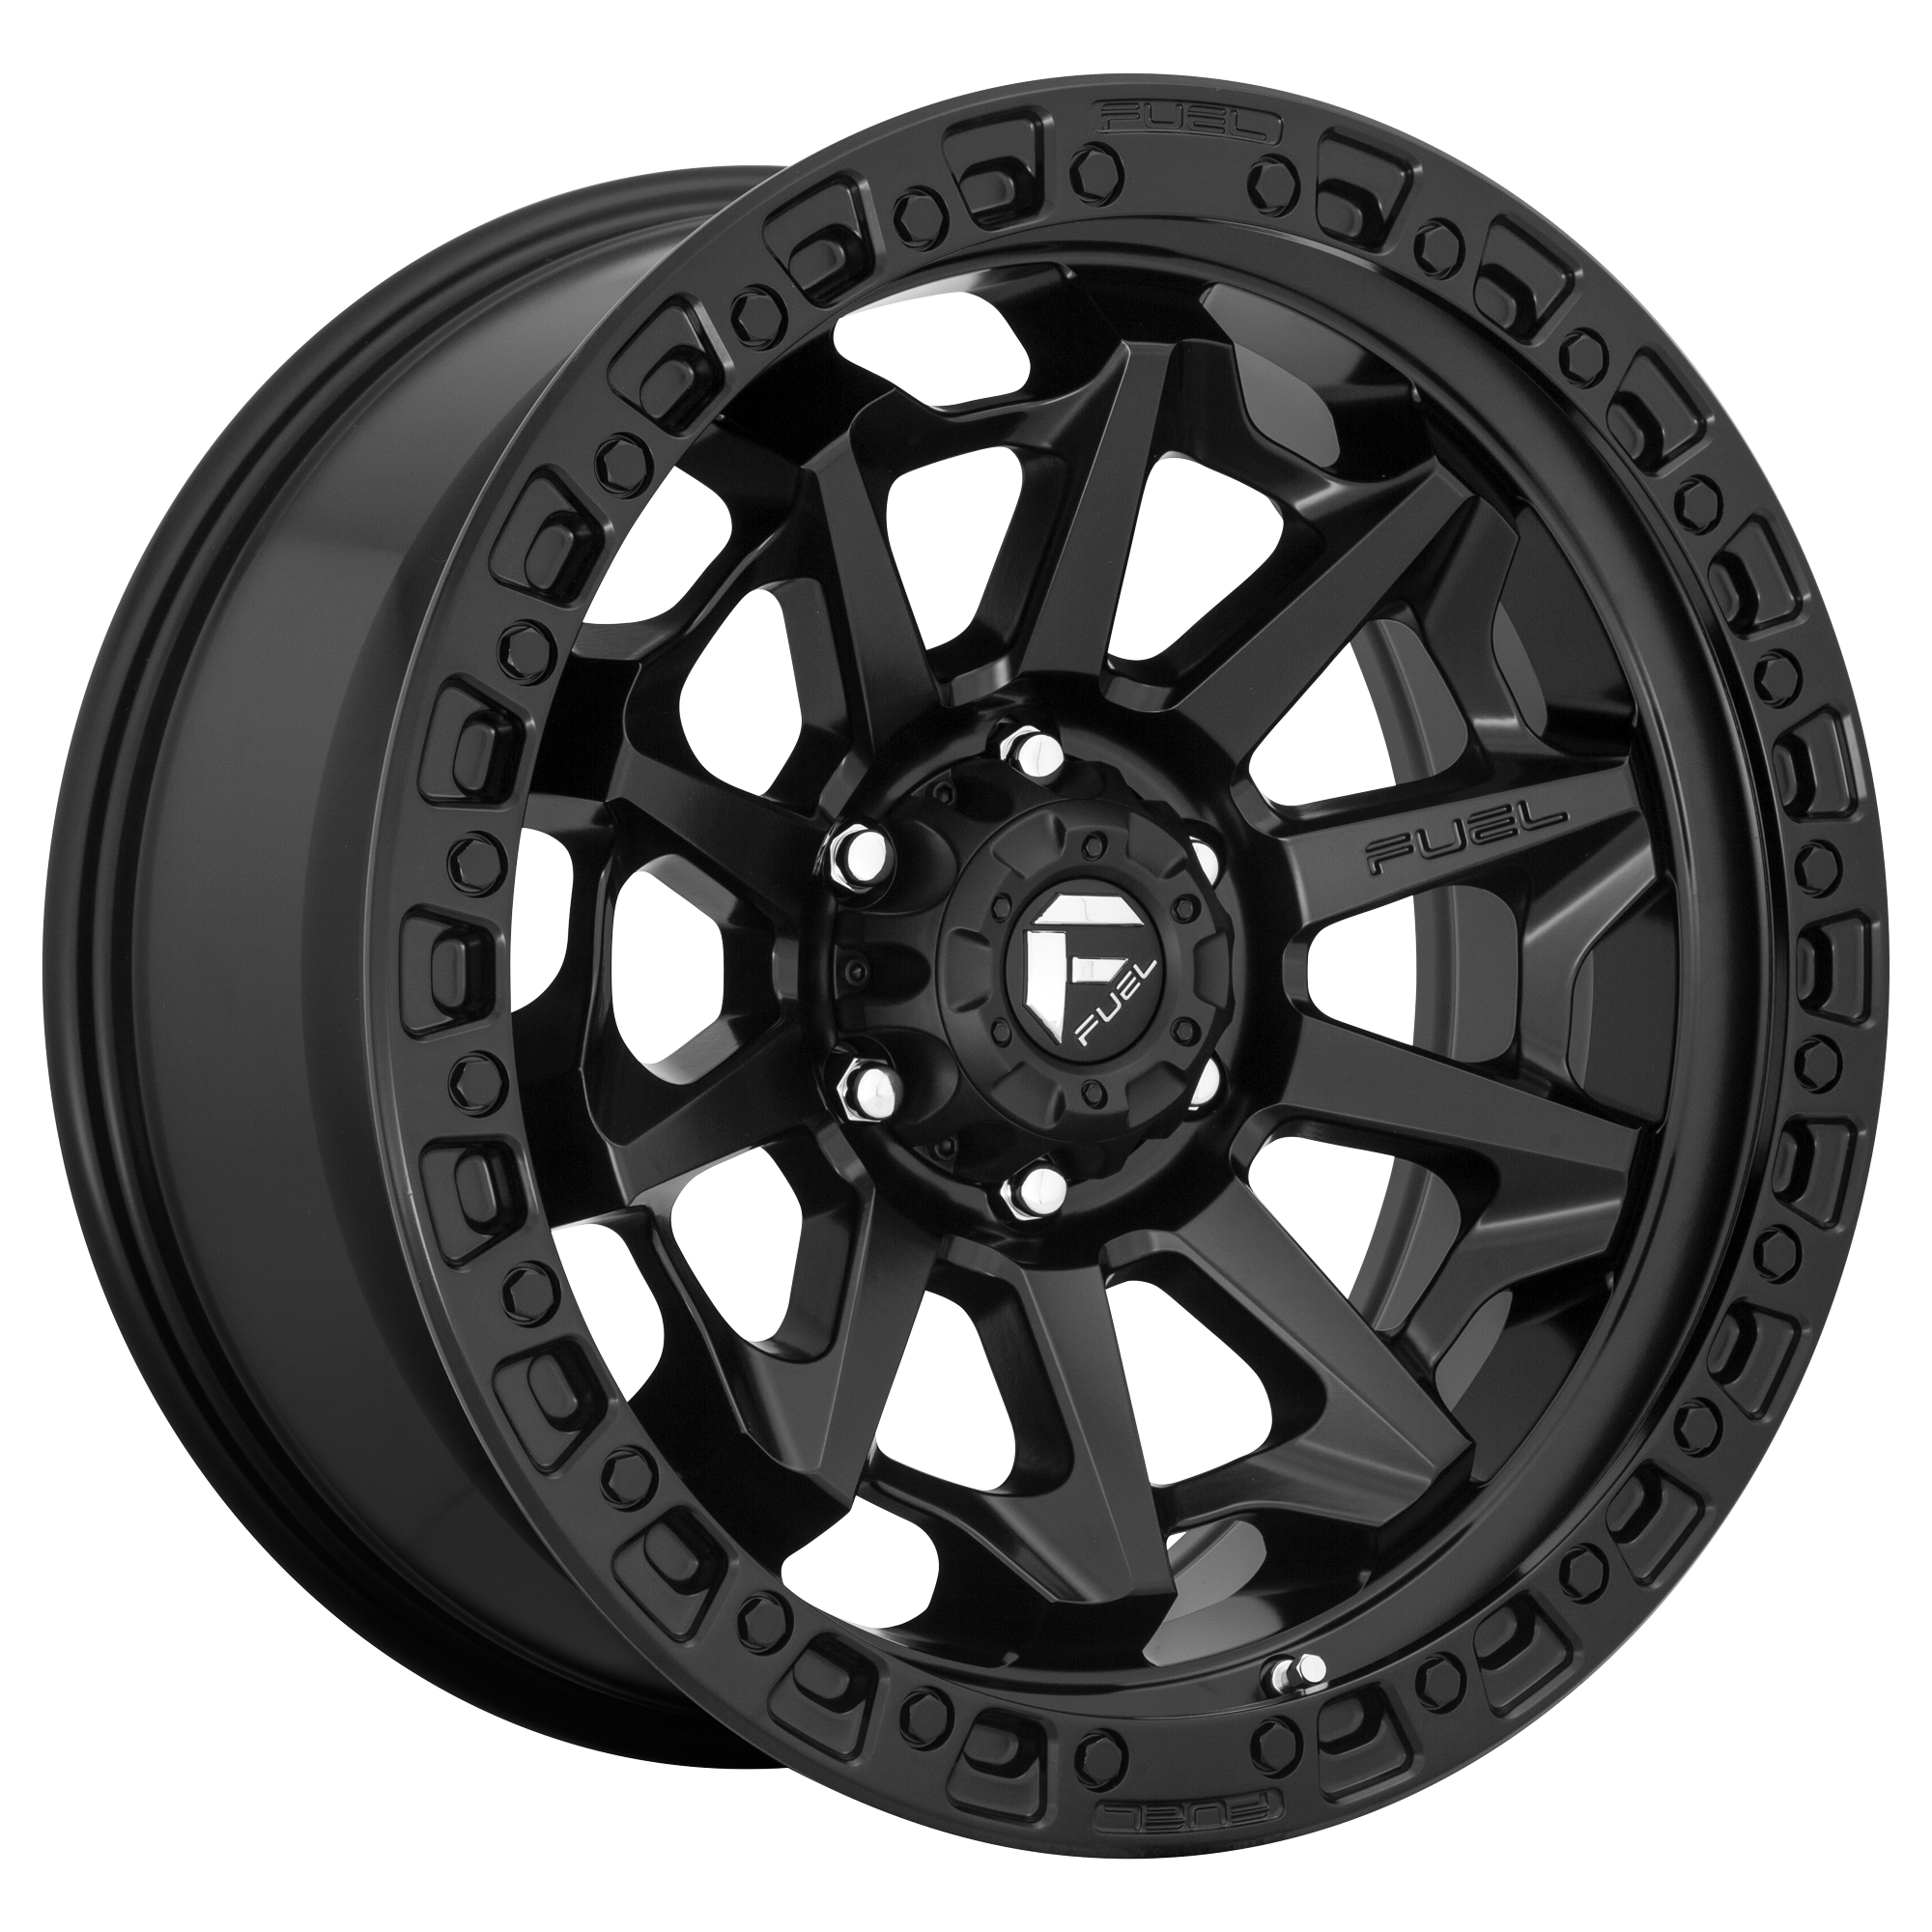 COVERT 18x9 5x127.00 MATTE BLACK (20 mm) - Tires and Engine Performance